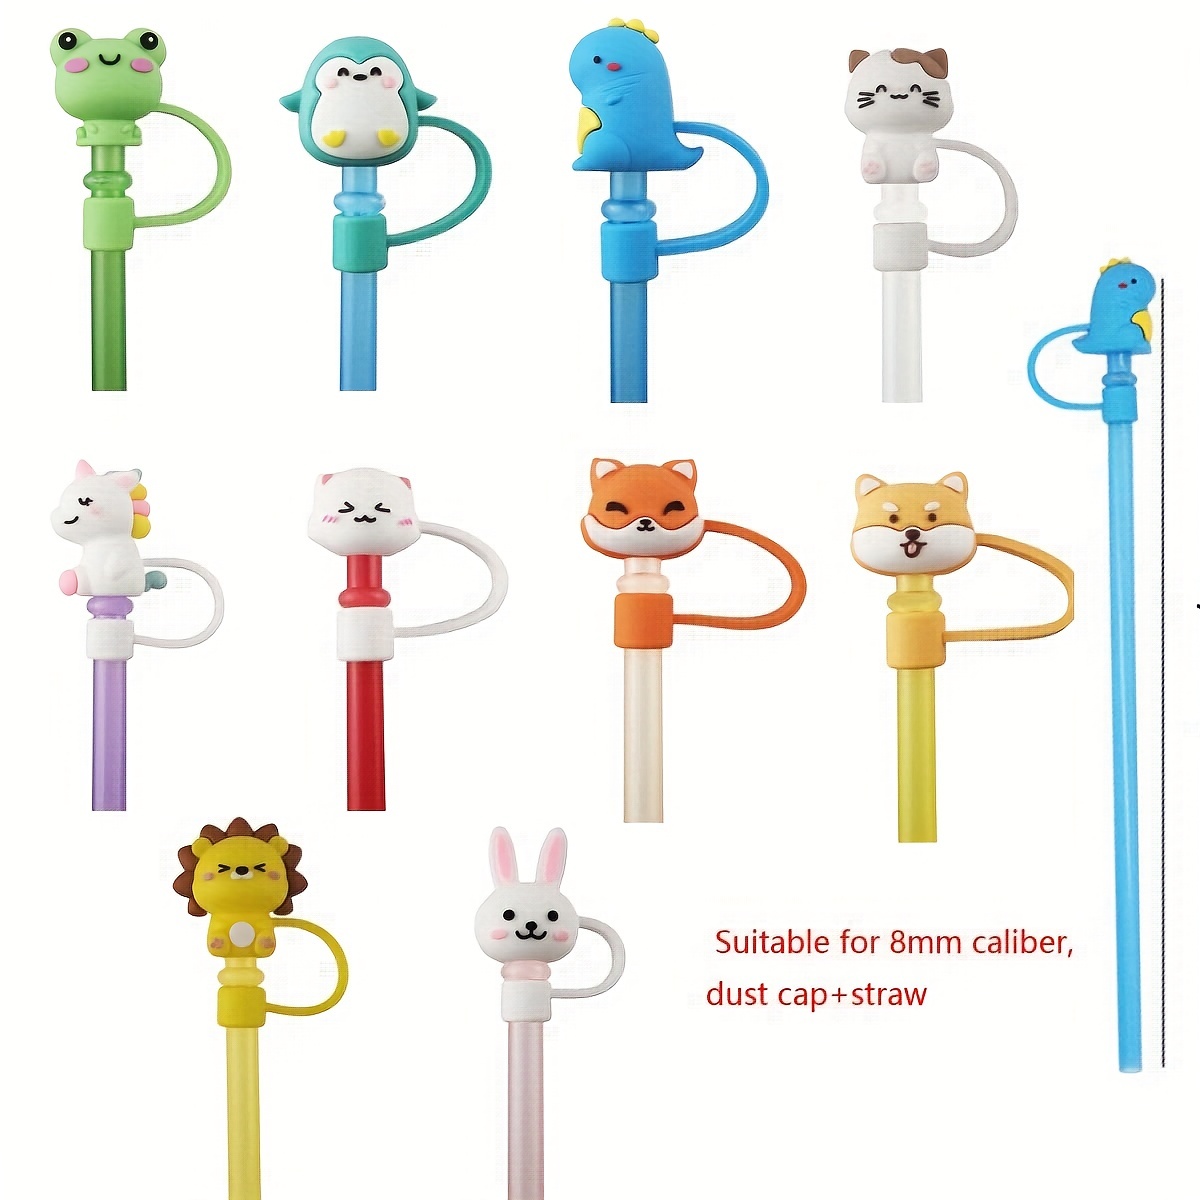 12 Pcs Animals Silicone Straw Covers Cap Reusable Straw Tip Covers Straw Topper Drinking Straw Cover Cute Straws Plugs for 6-8 mm Straws, Birthday